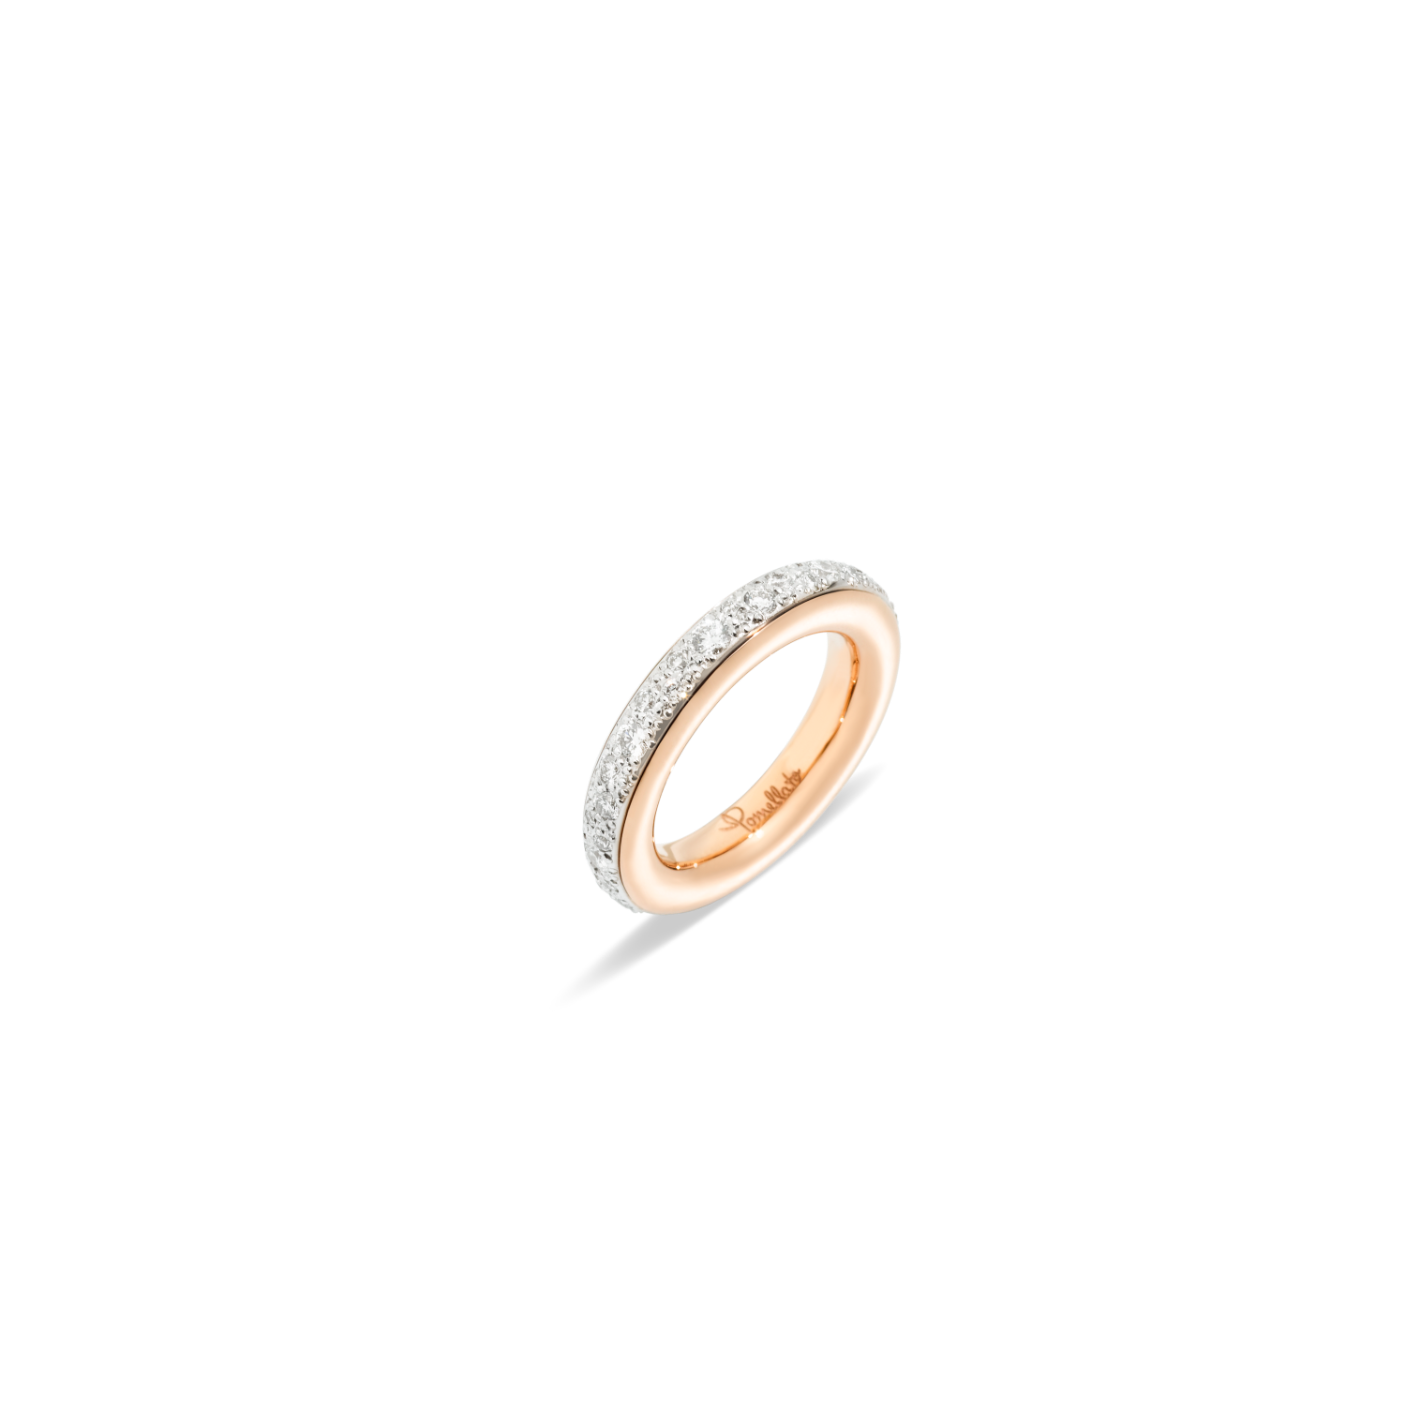 PAB7120_O7000_DB000_010_Pomellato_ring-iconica-small-rose-gold-18kt-diamond.png